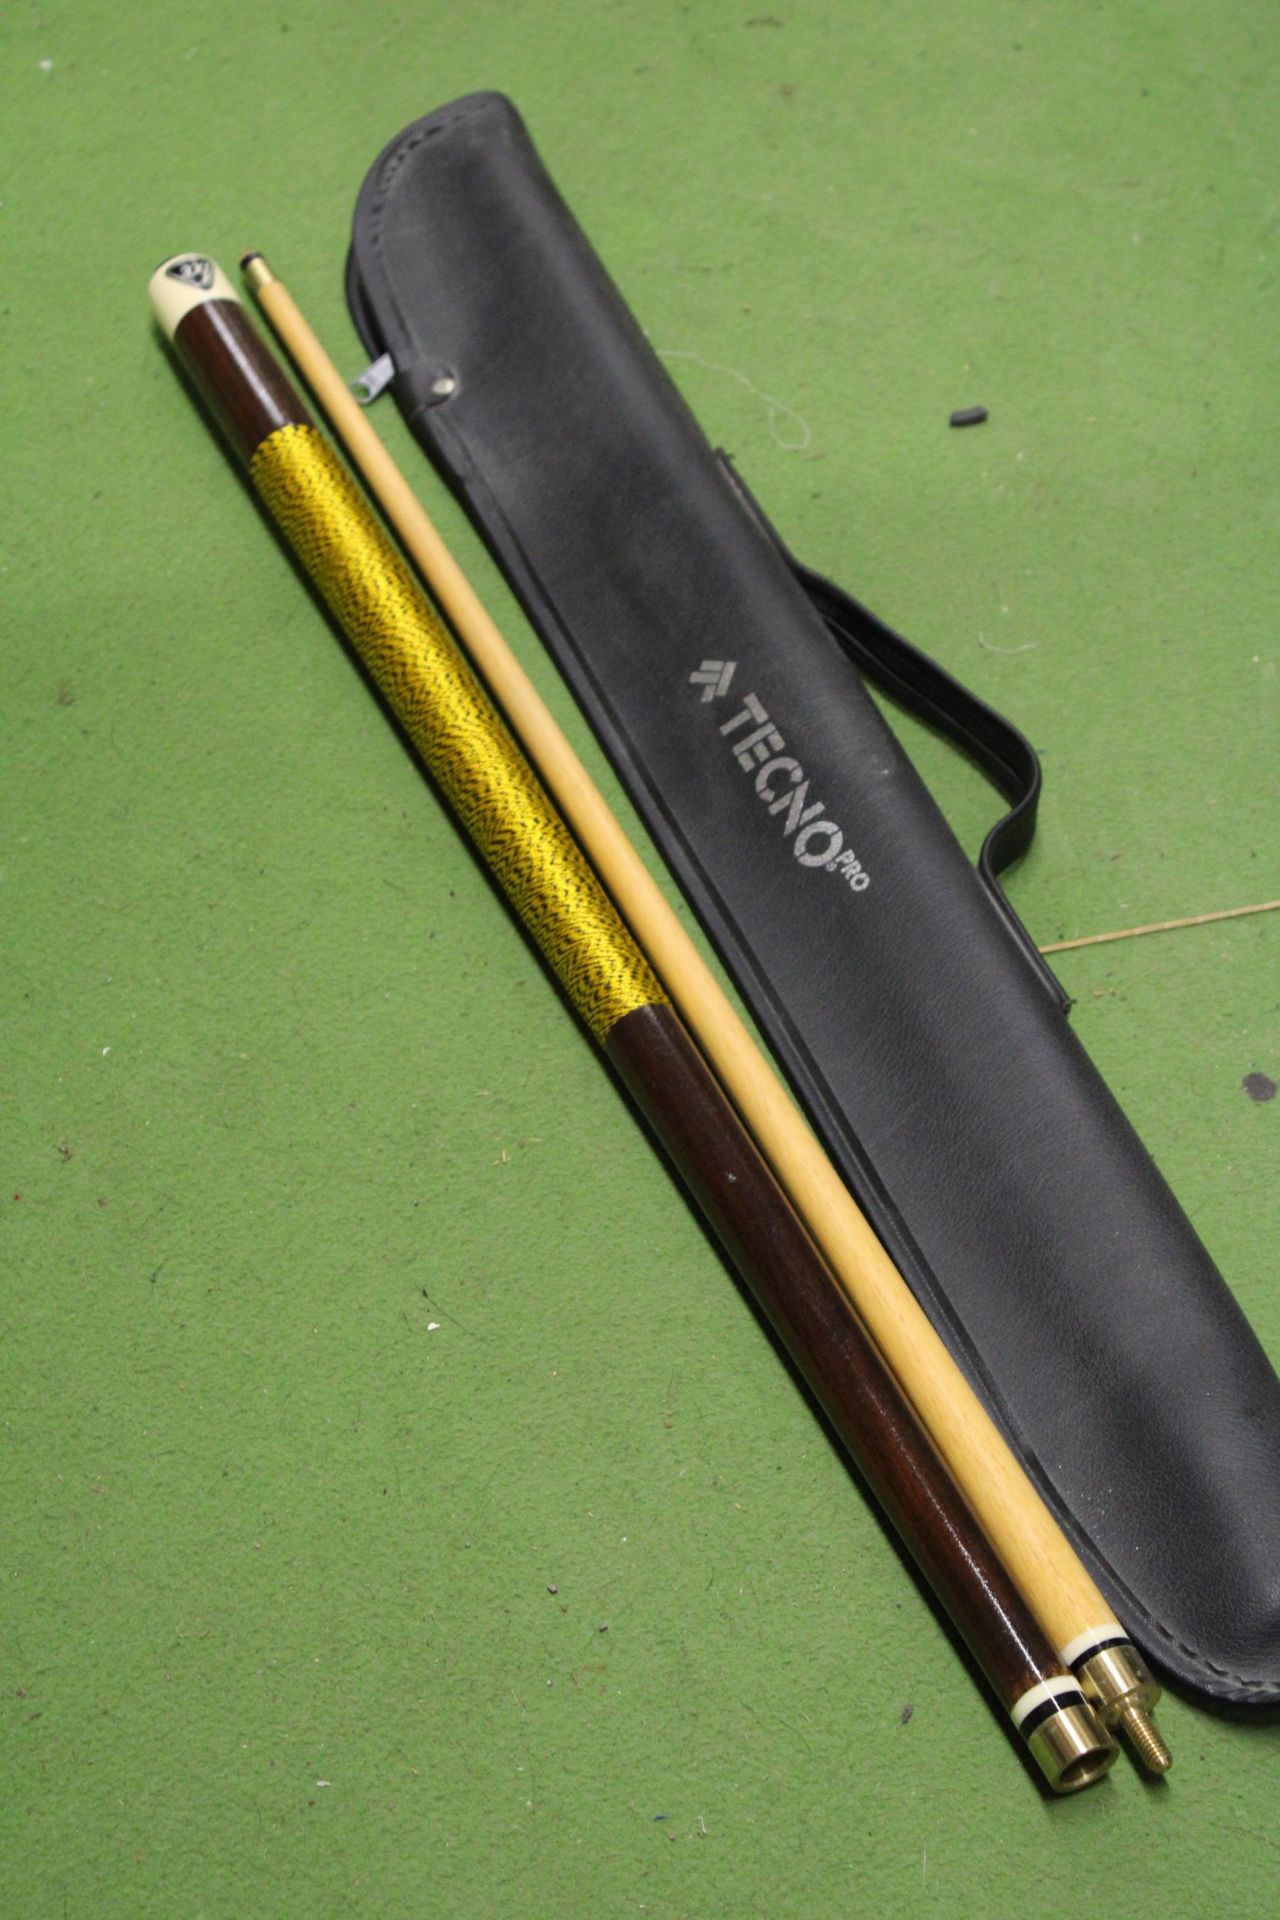 A BCE POOL/SNOOKER CUE IN A SOFT CASE - Image 4 of 6